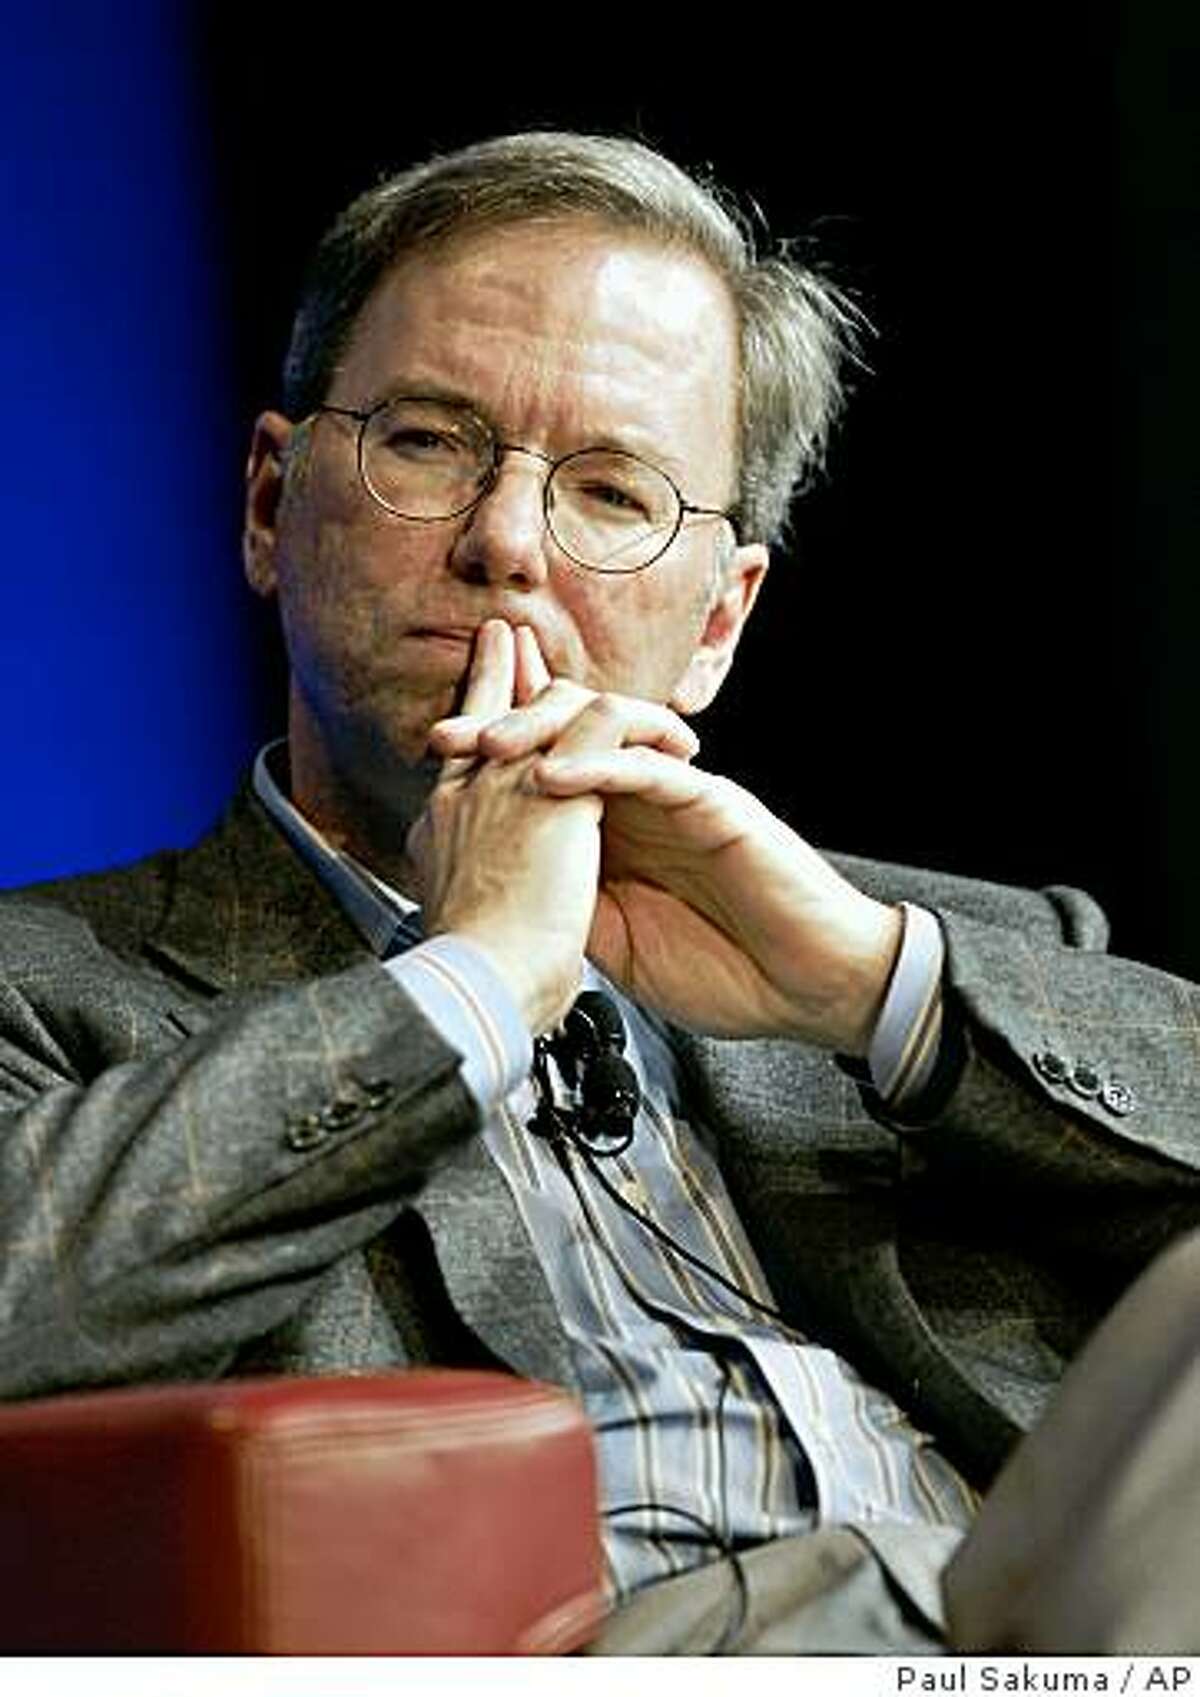 In this Oct. 27, 2008 photo, Google CEO Eric Schmidt ponders a question during a meeting at Google headquarters in Mountain View, Calif. Google Inc. on Thursday, April 16, 2009 announced it eked out a higher profit in the first quarter as the Internet search leader trimmed its work force and winnowed other expenses to overcome the slowest revenue growth since since the company went public nearly five years ago. (AP Photo/Paul Sakuma)